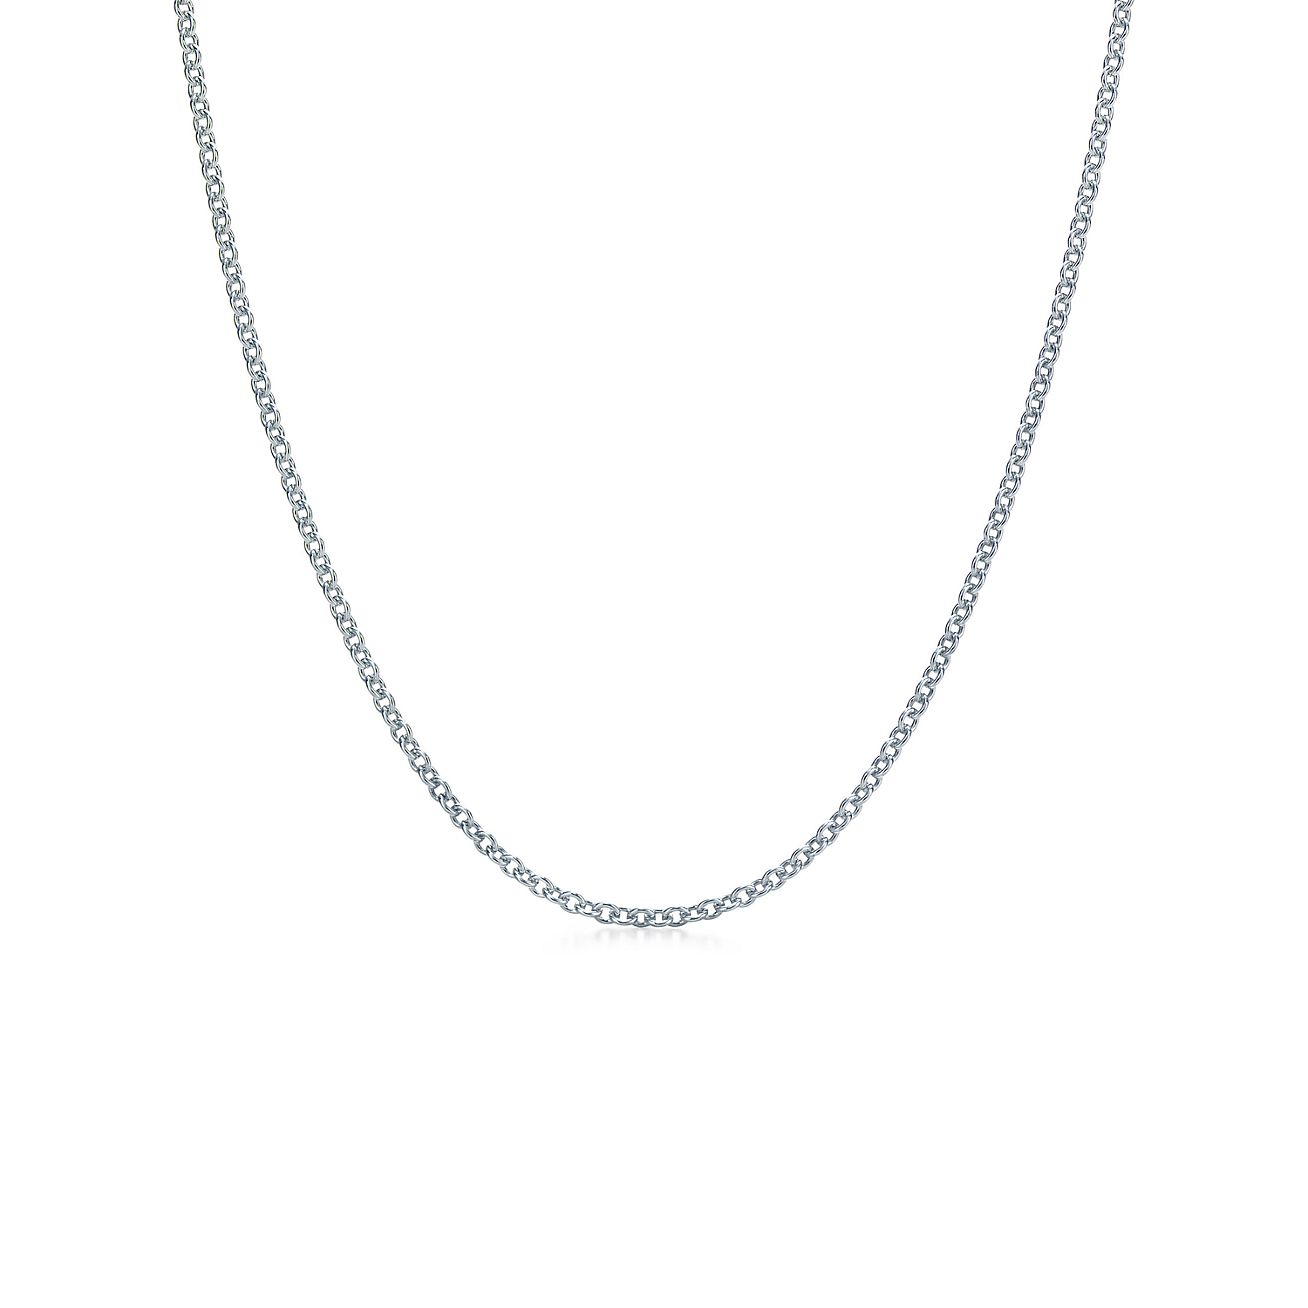 Large chain in sterling silver, 18 